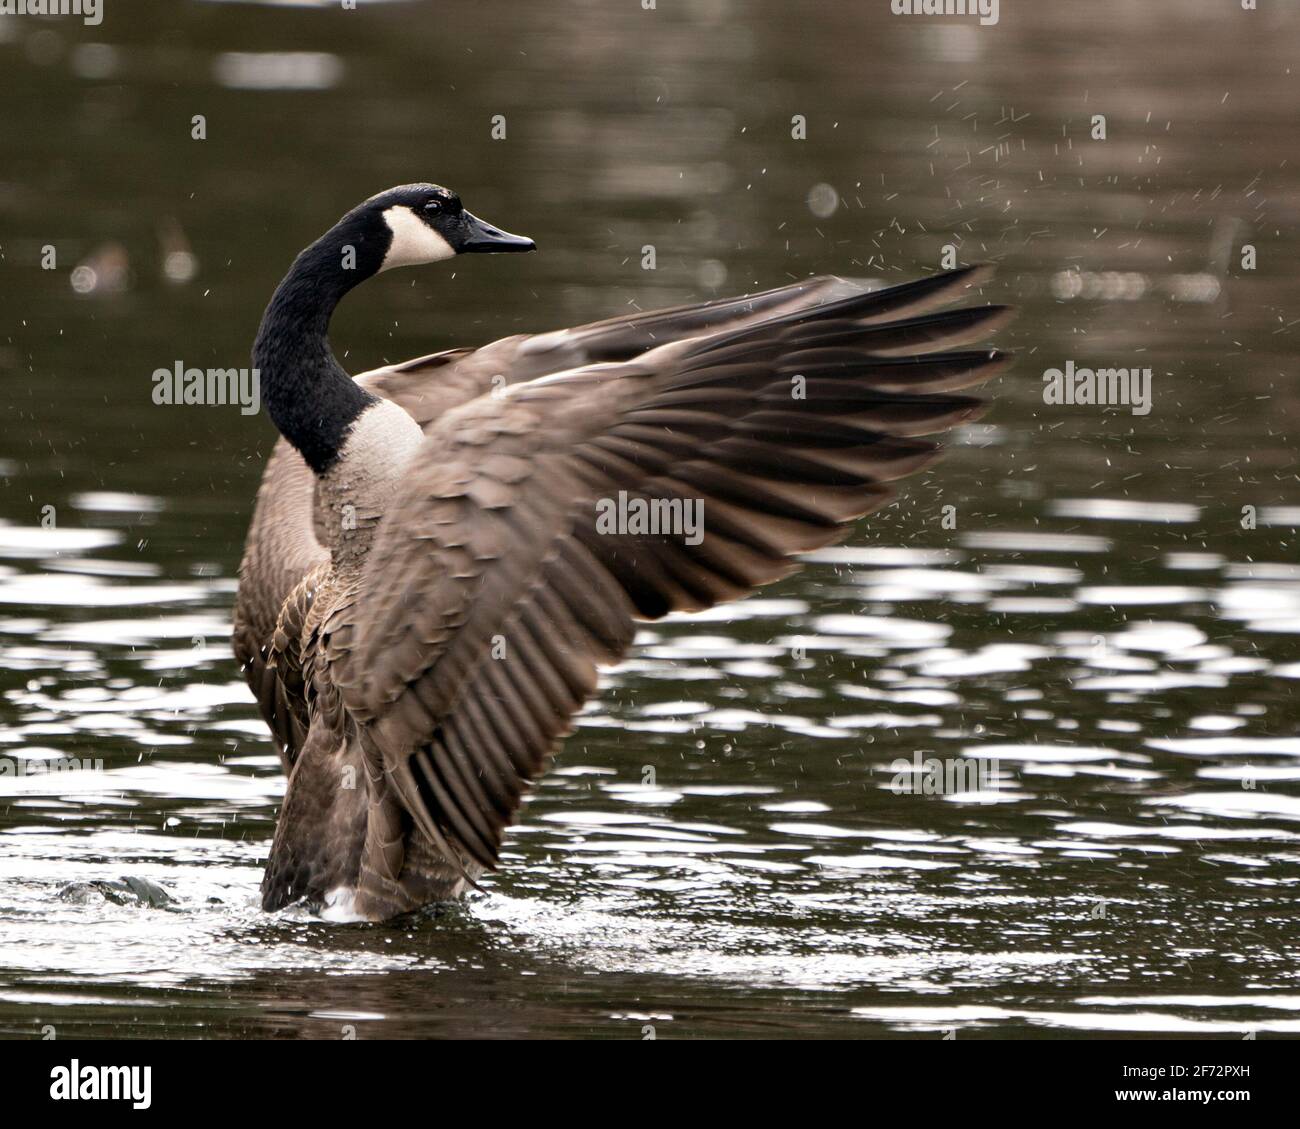 Canadian Geese close-up profile view swimming in the water with spread wings in its habitat and environment. Canada Geese Image. Picture. Portrait. Stock Photo